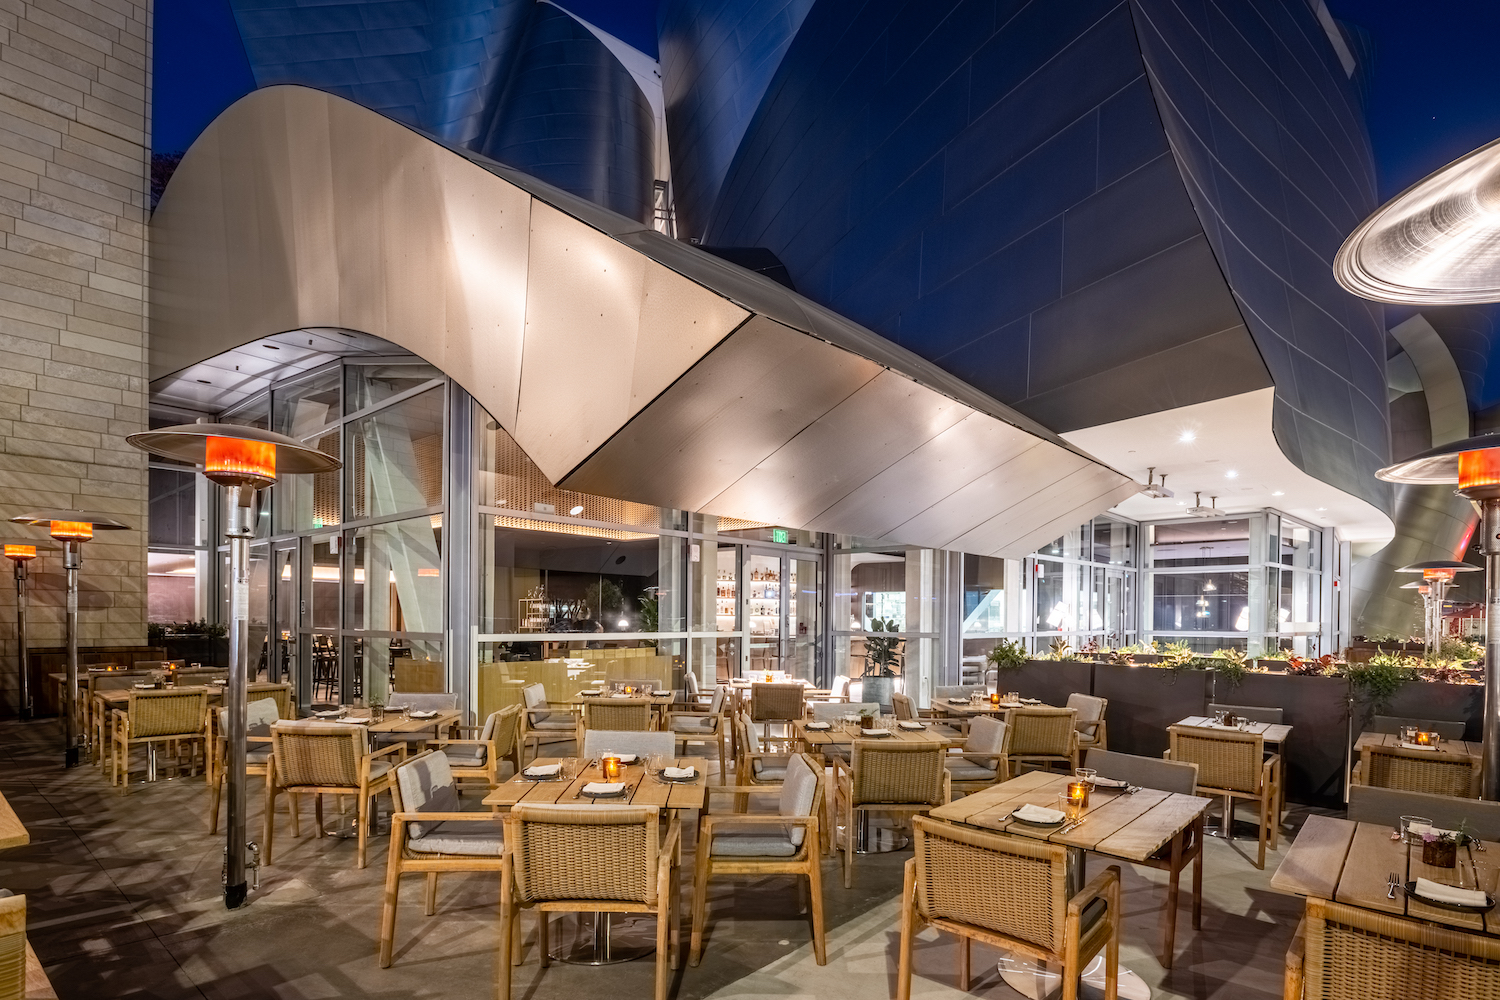 asterid's outdoor seating, situated beside the Walt Disney Concert Hall.